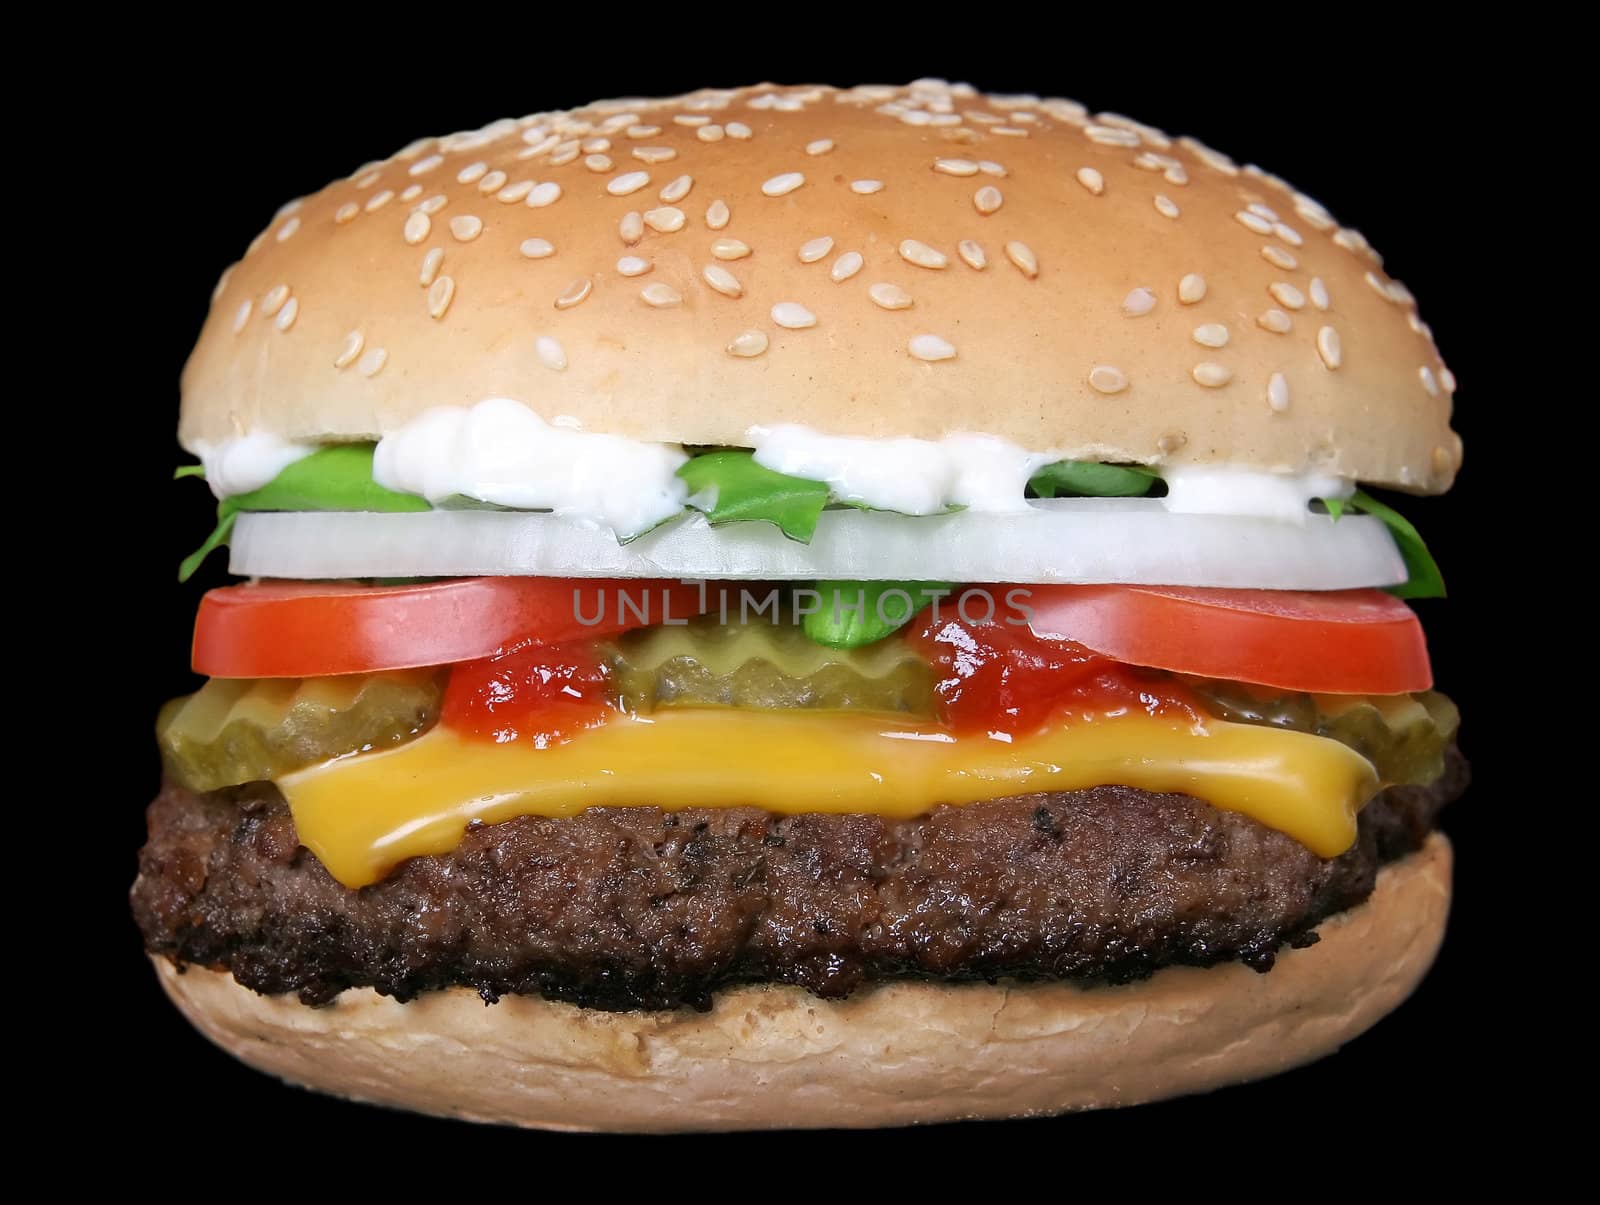 Silhouette of a cheese burger loaded with summer garden vegetables isolated on fire, macro